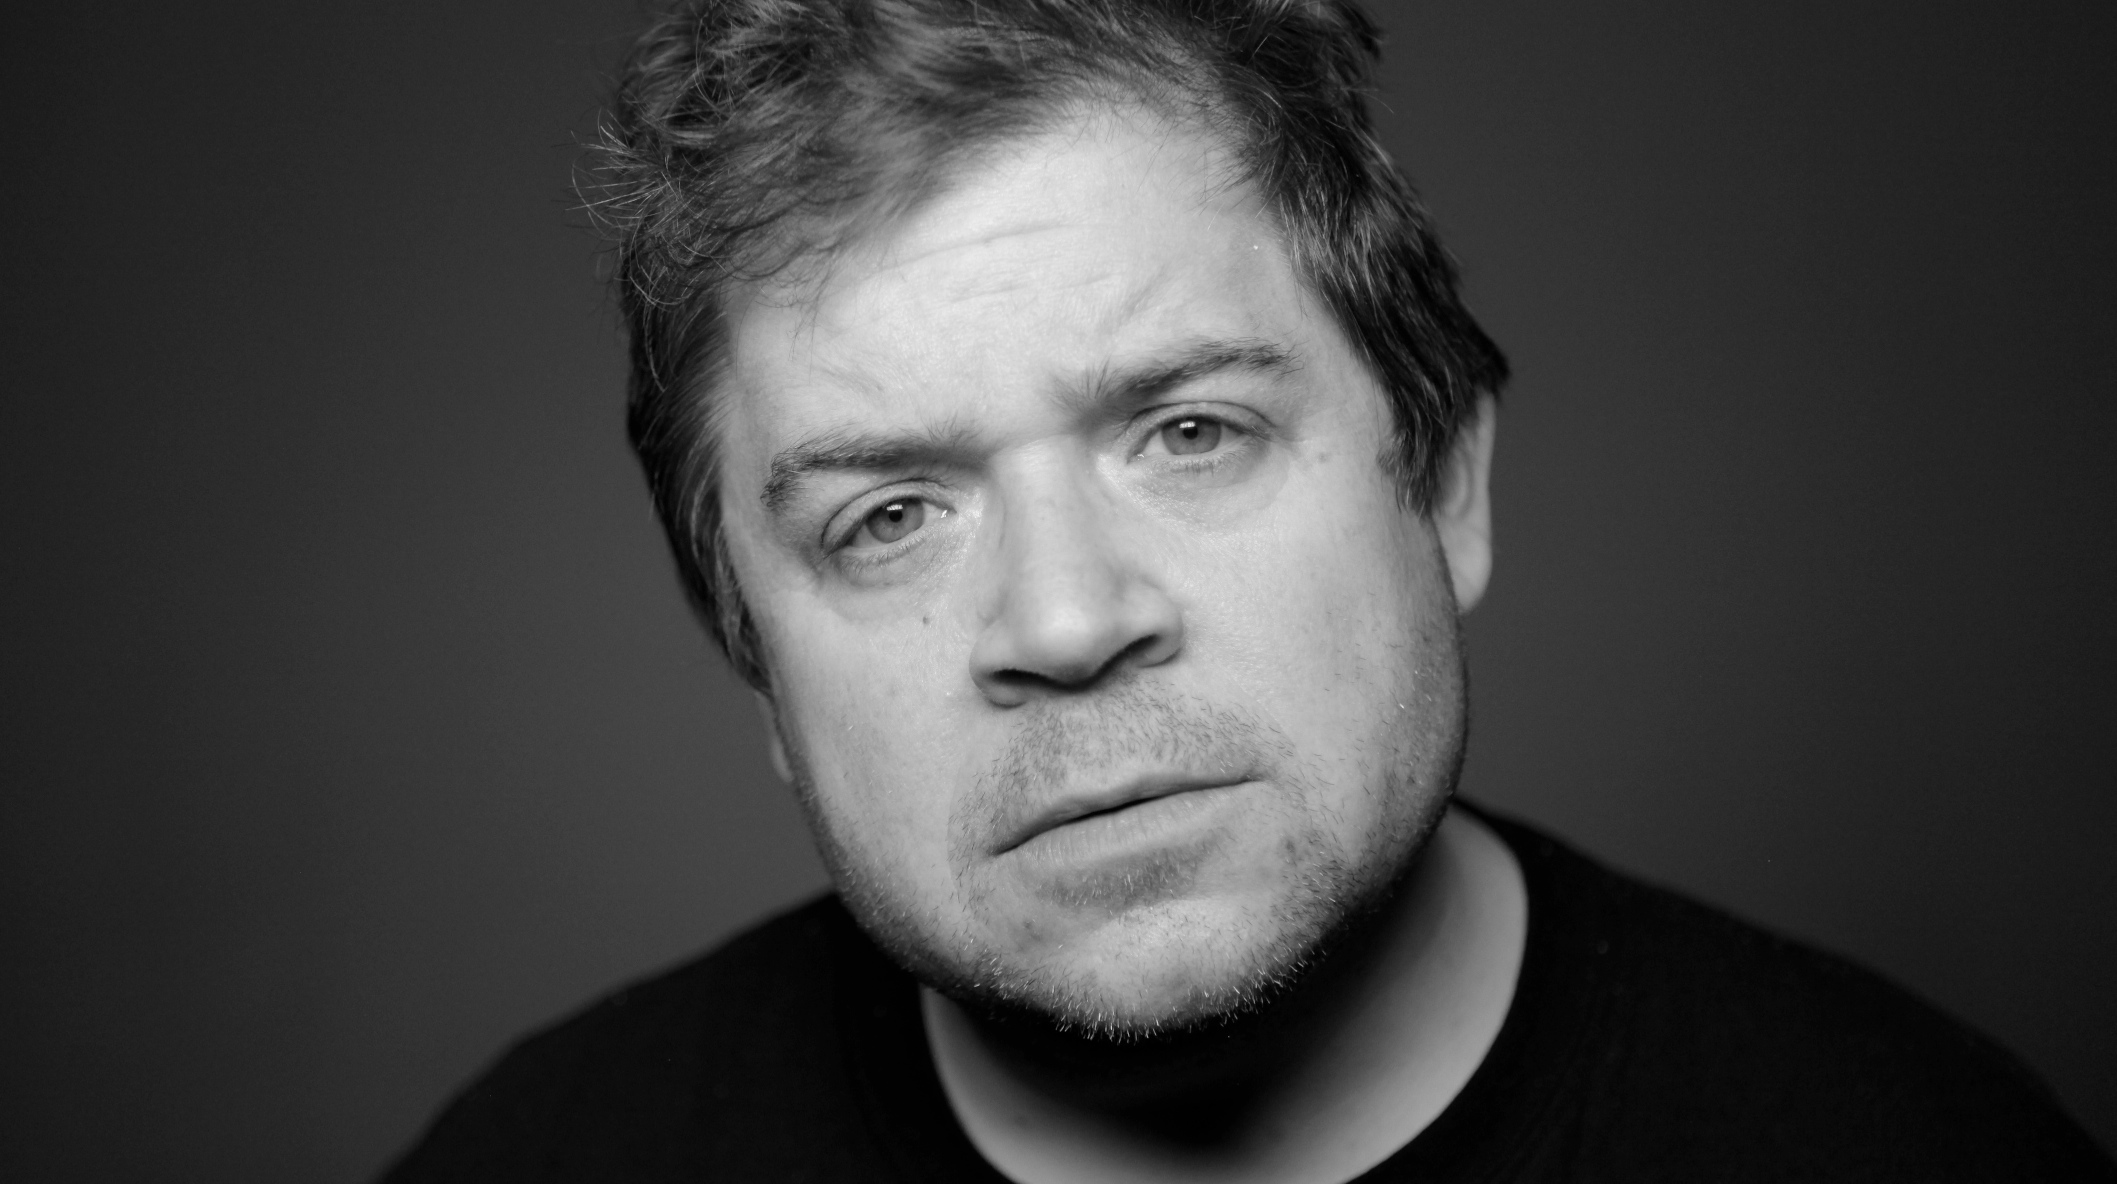 Oswalt knows all about movies.